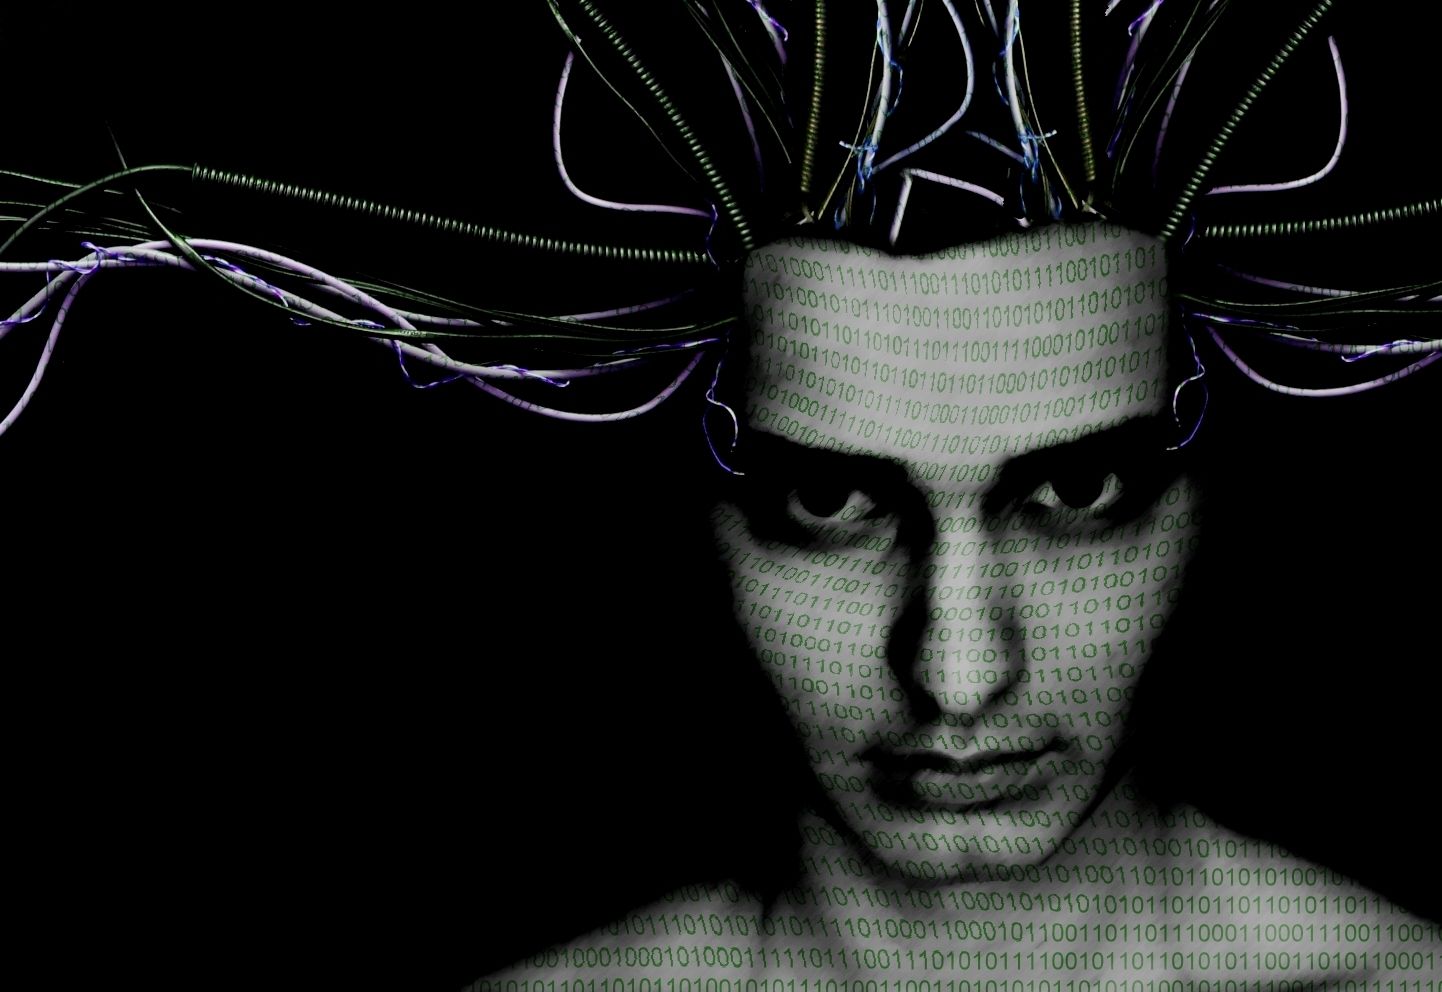 System Shock 2: classic shooter now available on Steam